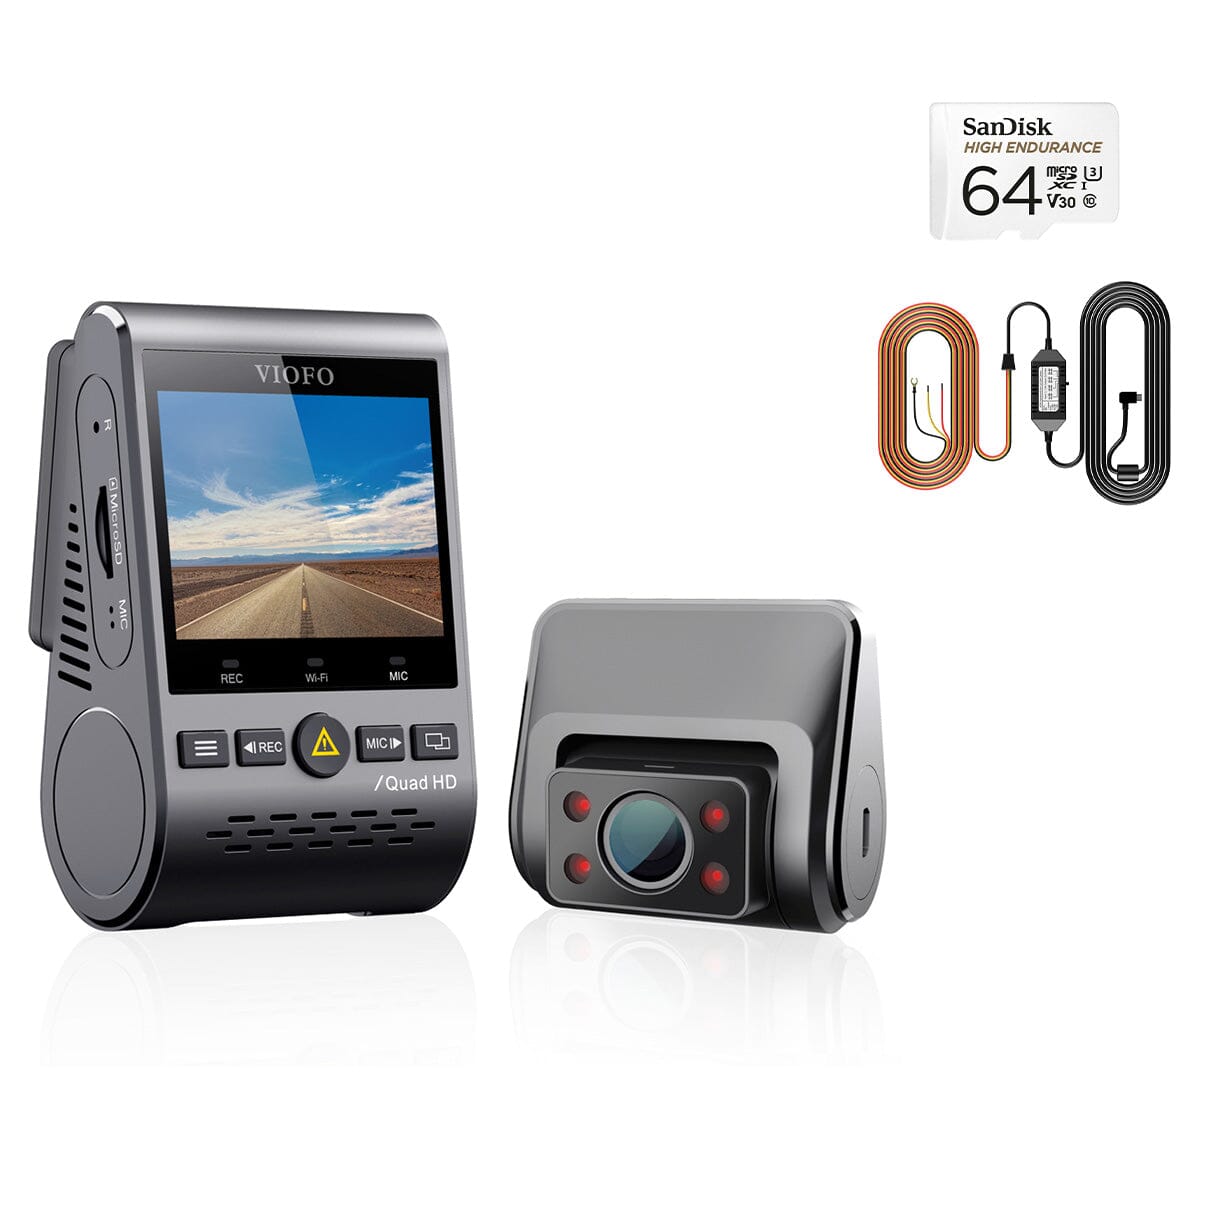 VIOFO A129 Plus Duo IR Dashcam - PREORDER - delivery date unknown